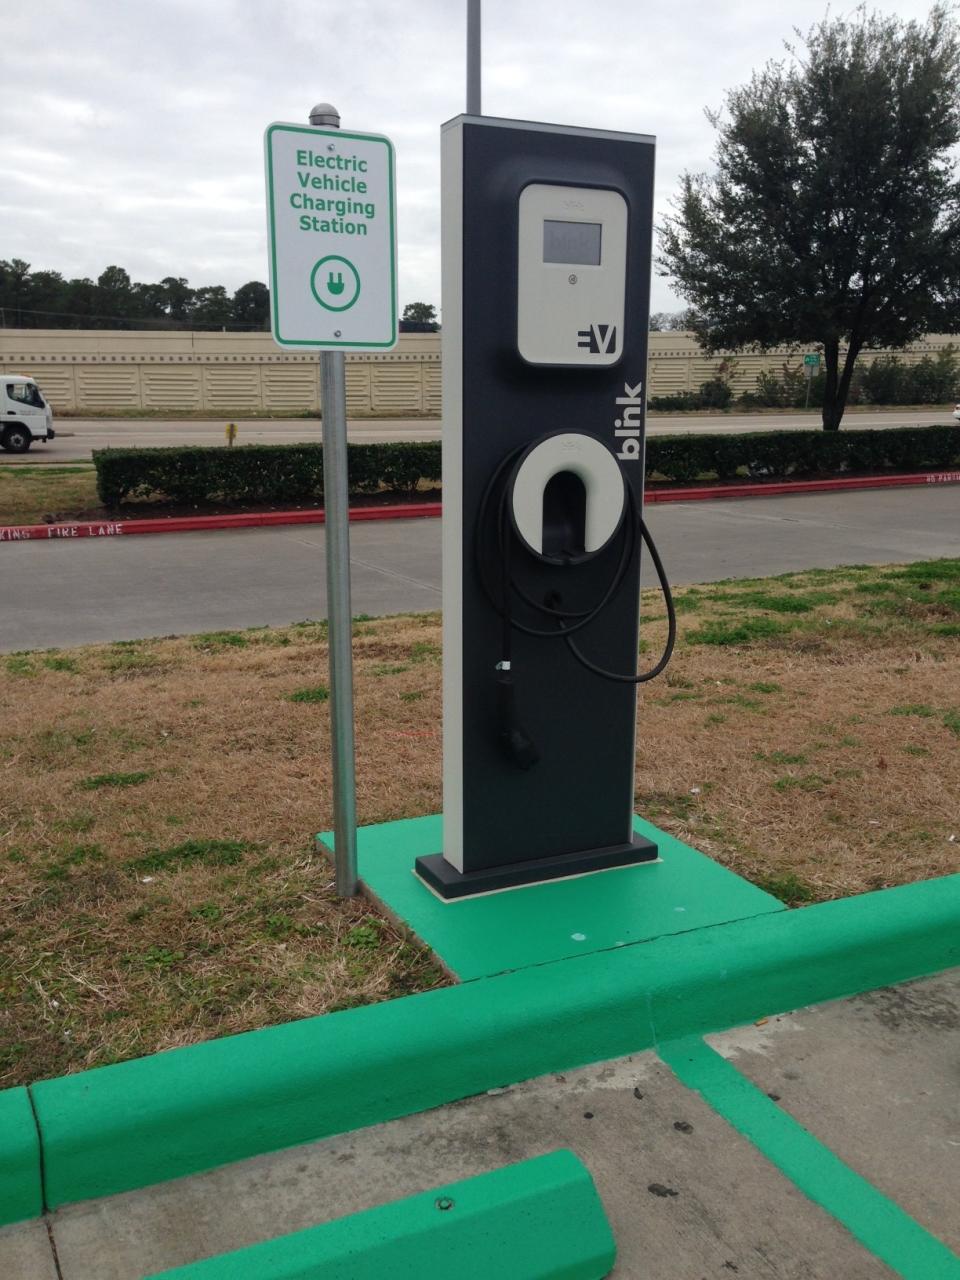 HOUSTON, TX - IKEA, the world's leading home furnishings retailer, today officially plugged-in two Blink® electric vehicle (EV) charging stations at its Houston store as part of its partnership with Car Charging Group, Inc. (Photo: Business Wire)